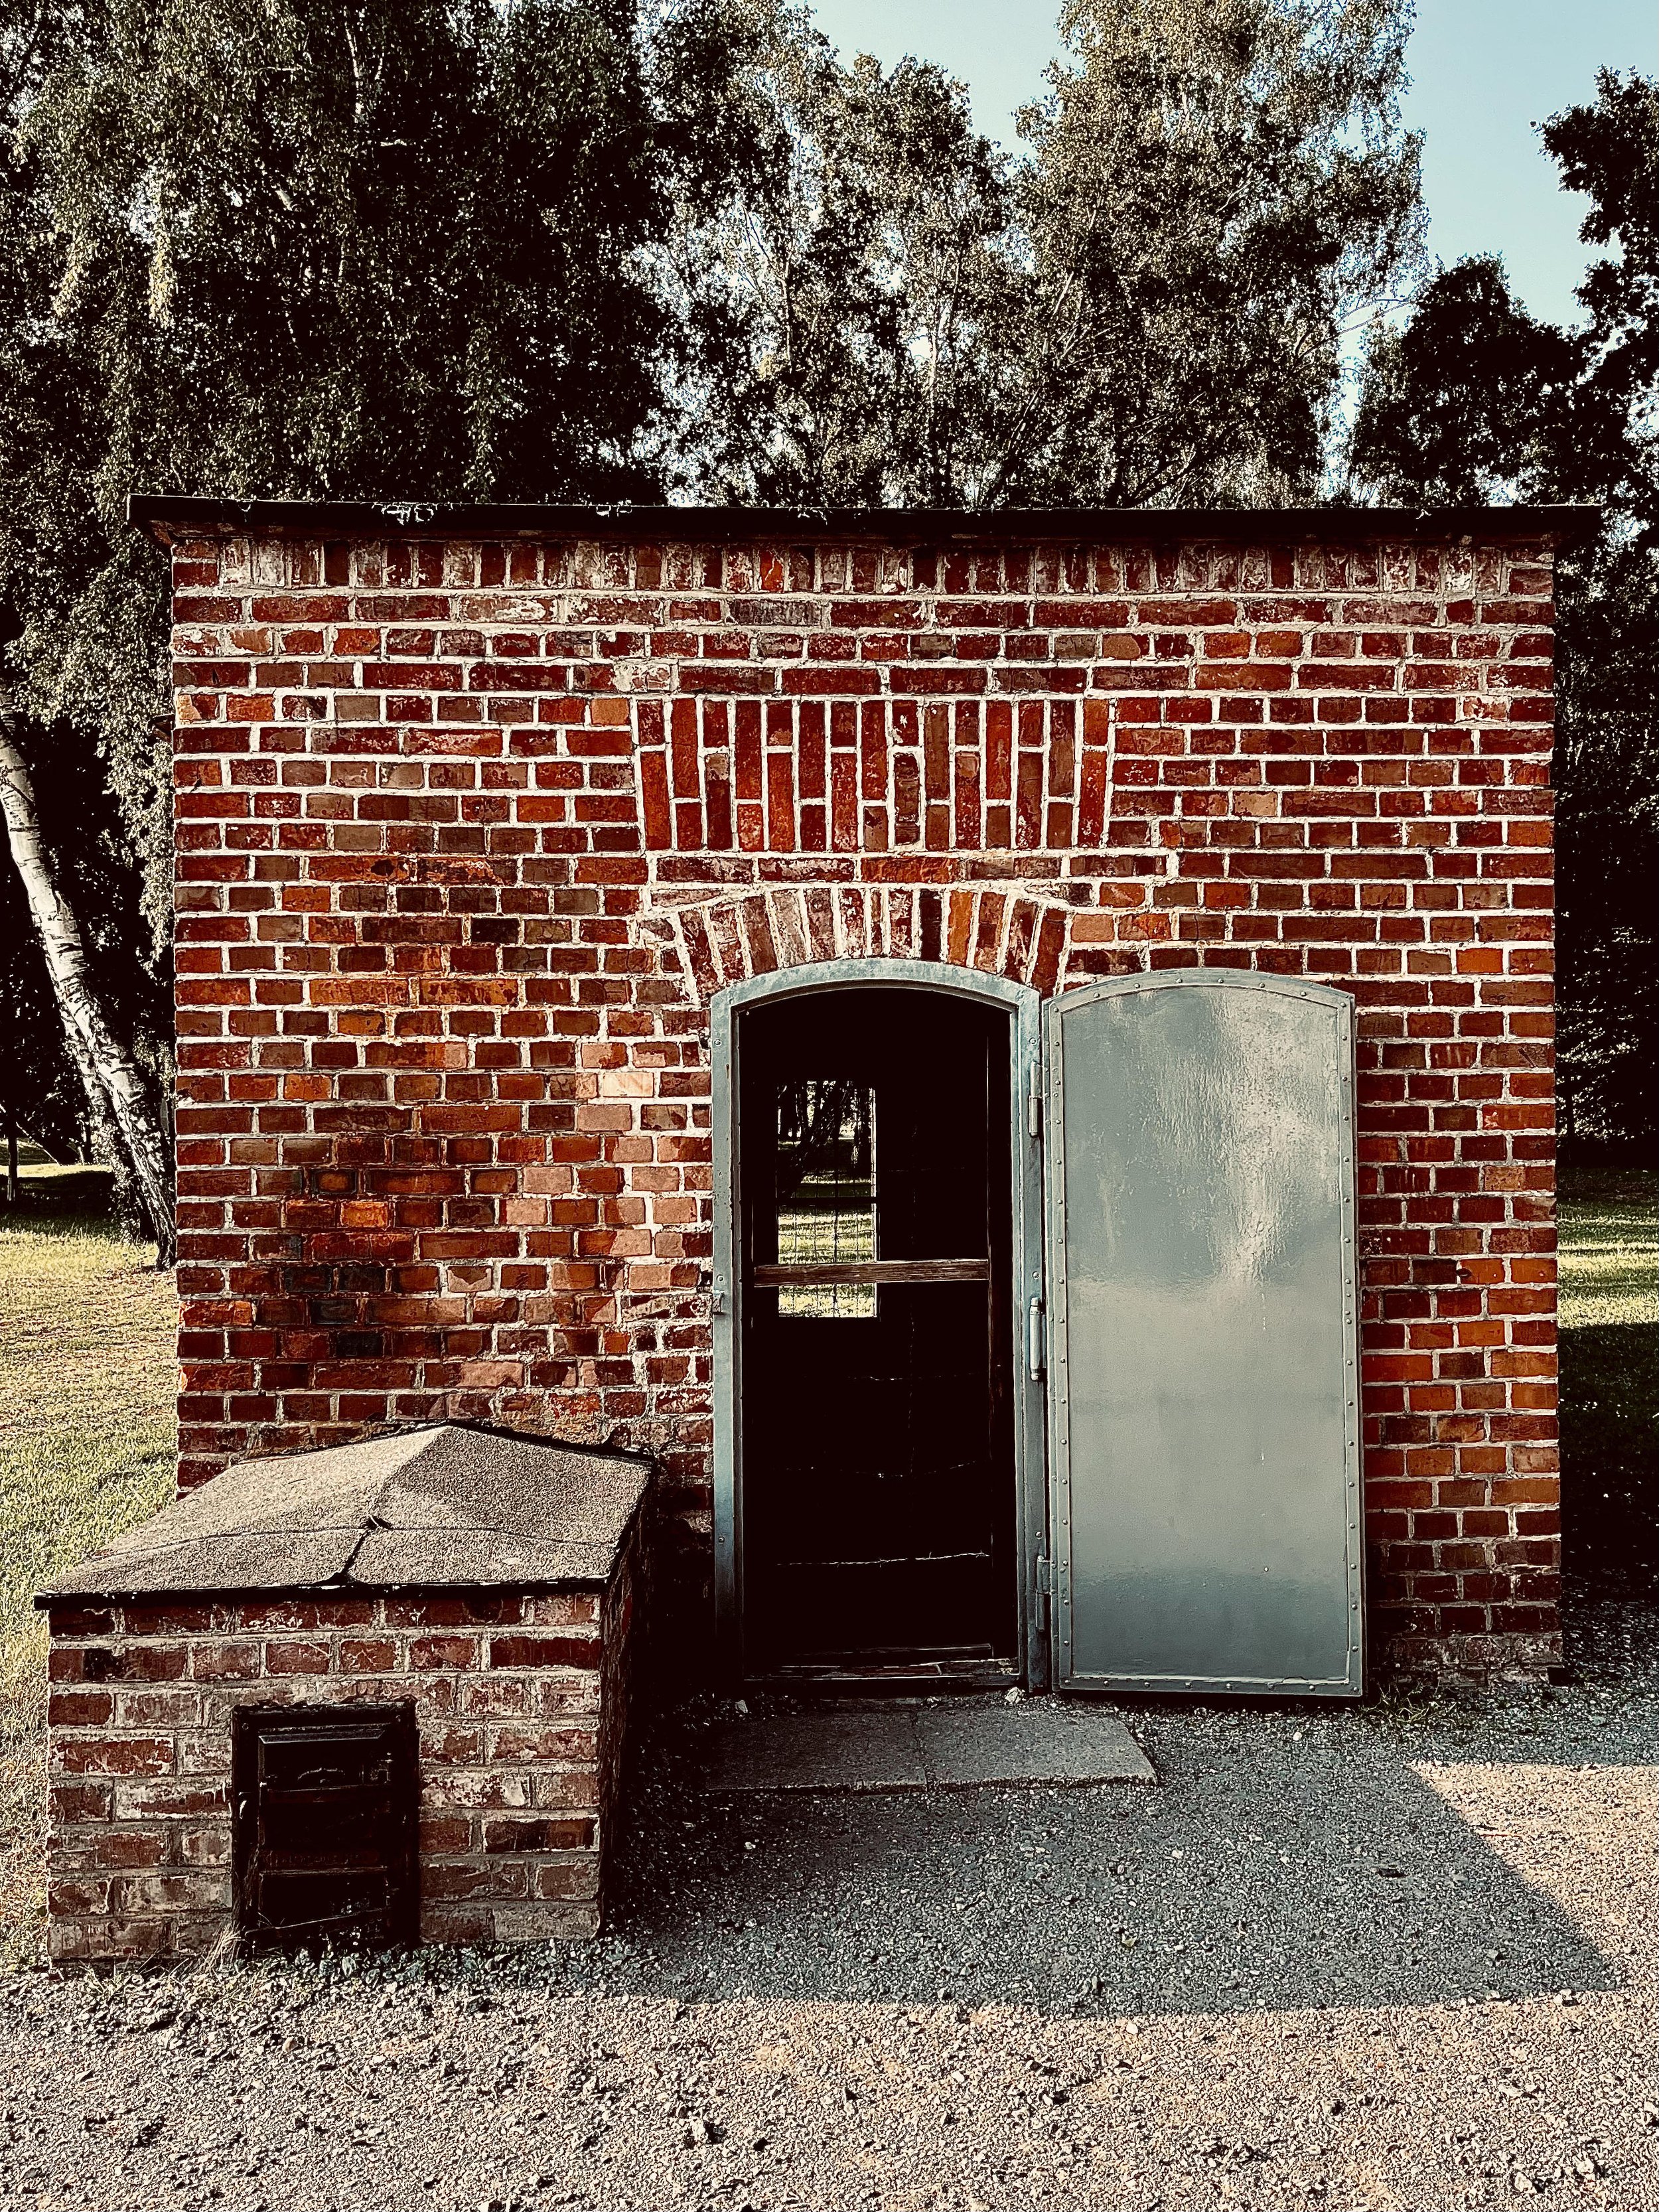 A gas chamber where mostly Jewish prisoners were poisoned